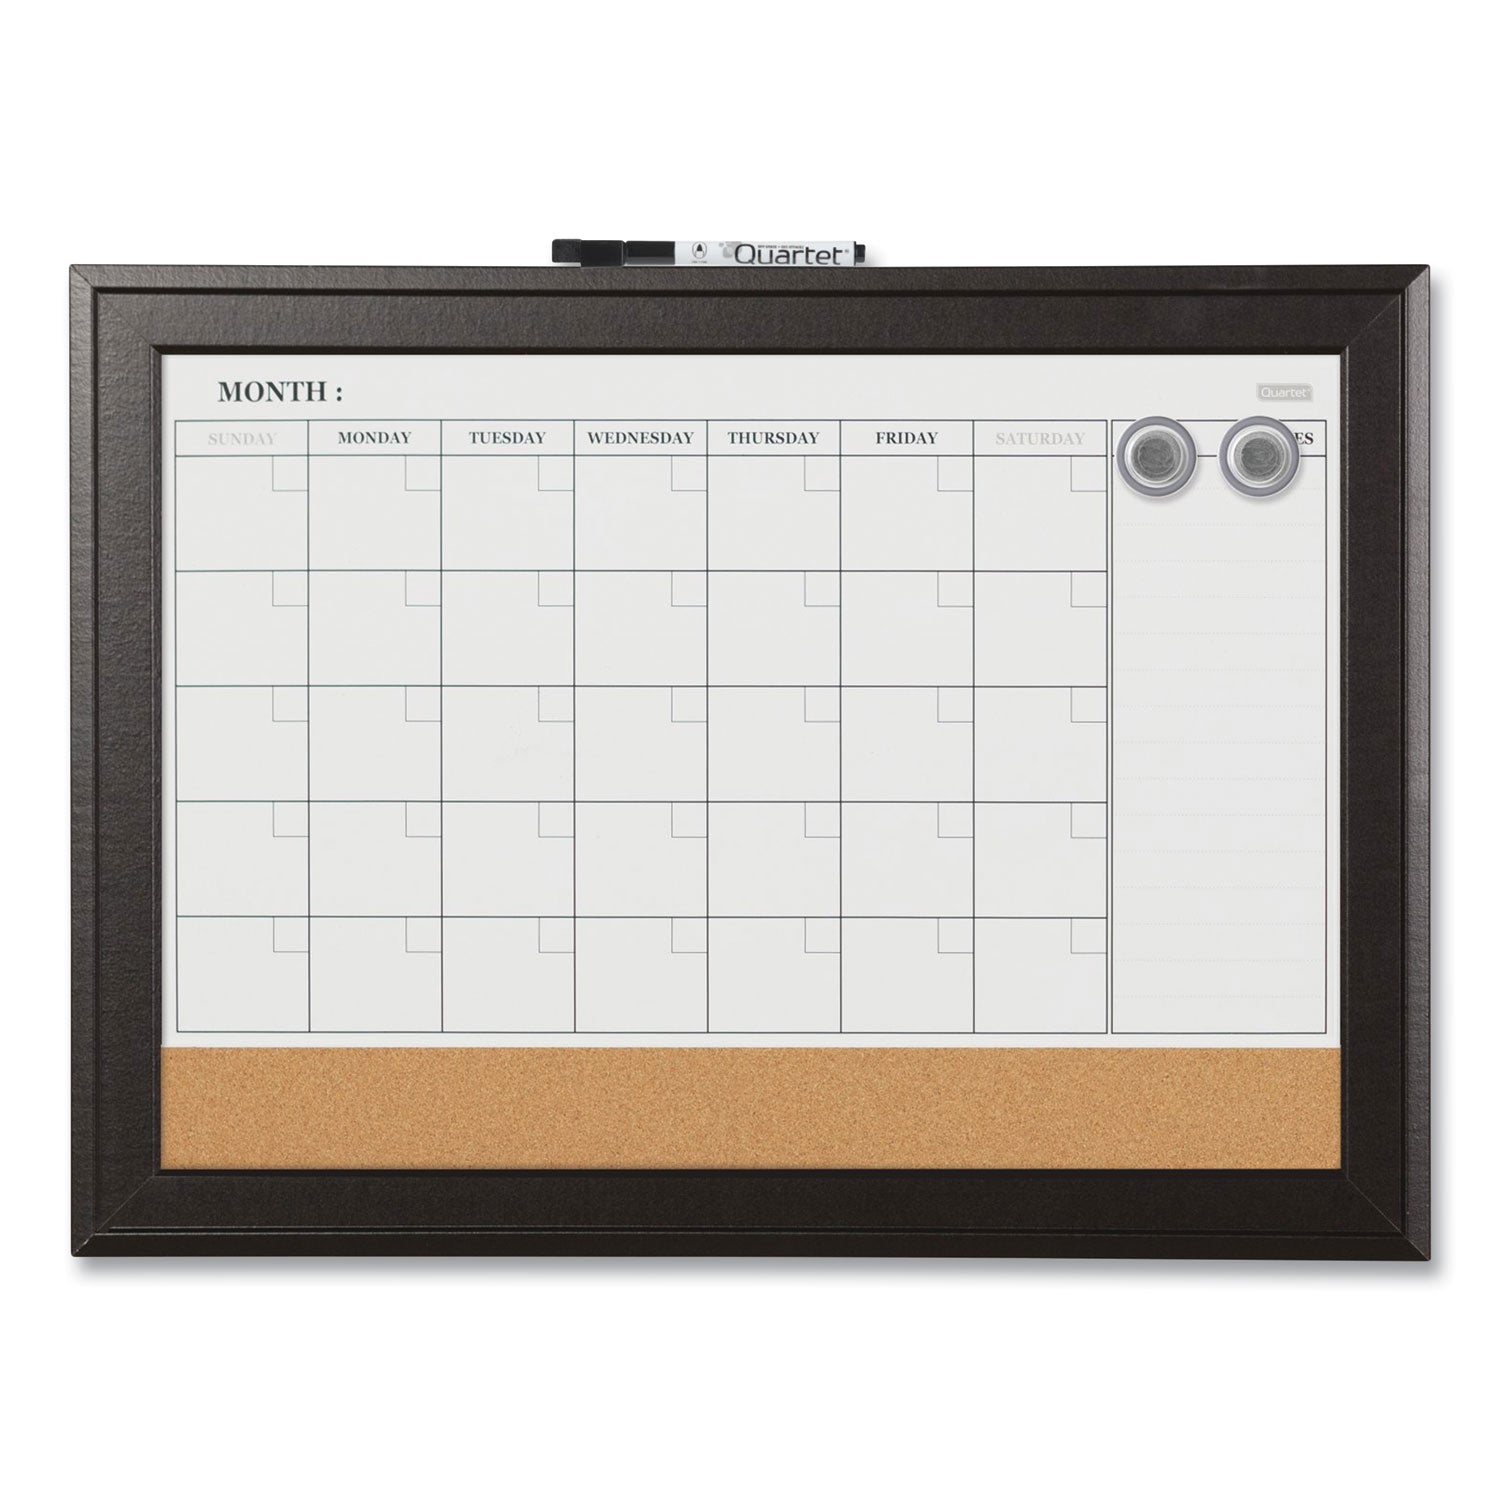 home-decor-magnetic-combo-dry-erase-board-with-cork-board-on-bottom-23-x-17-tan-white-surface-espresso-wood-frame_qrt79275 - 1